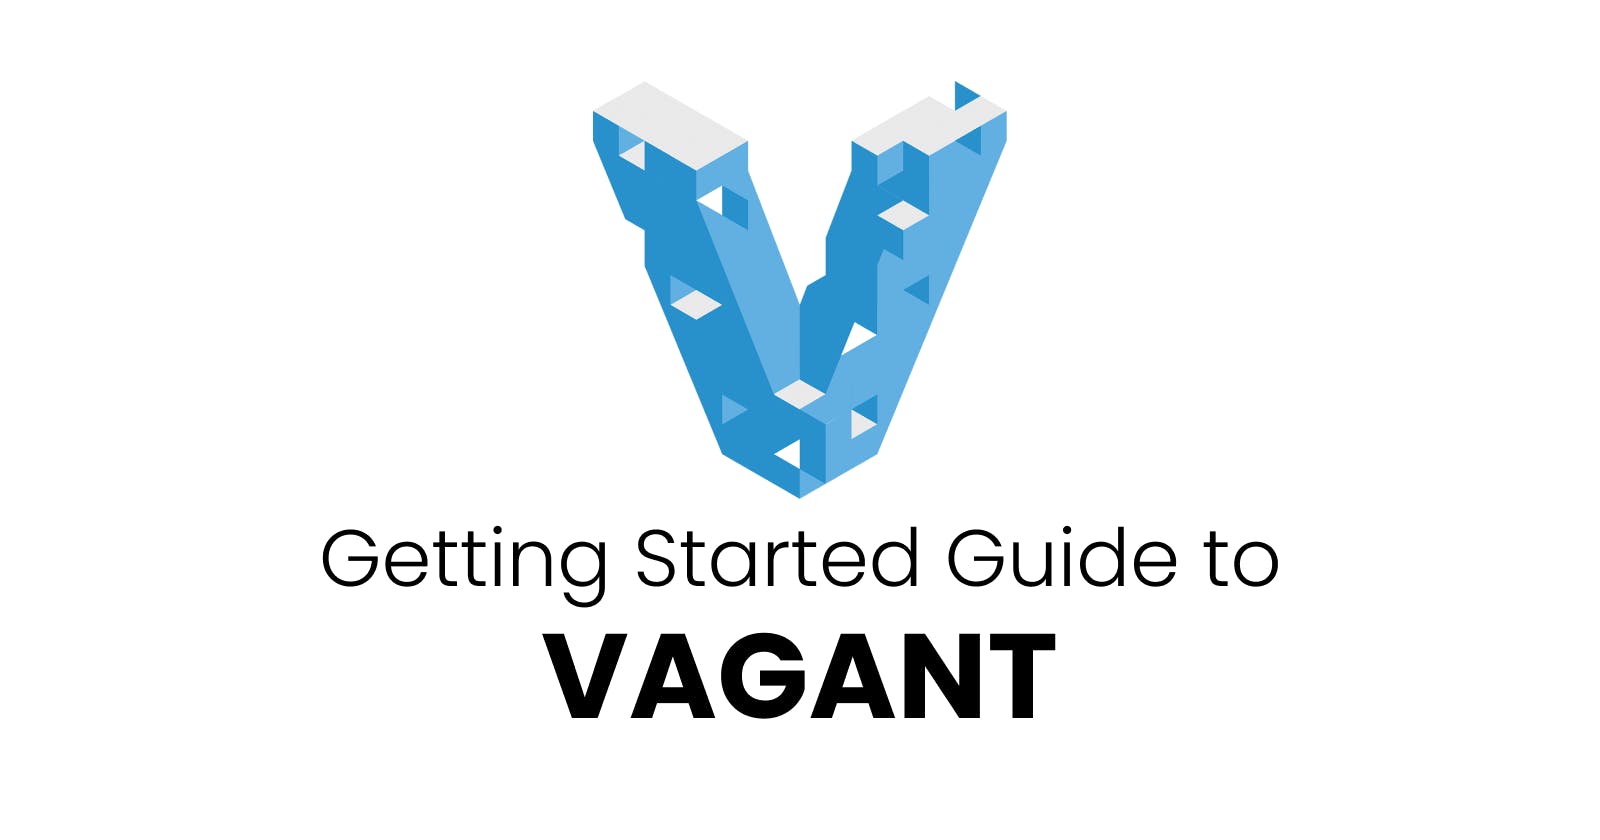 Complete Guide to Vagrant